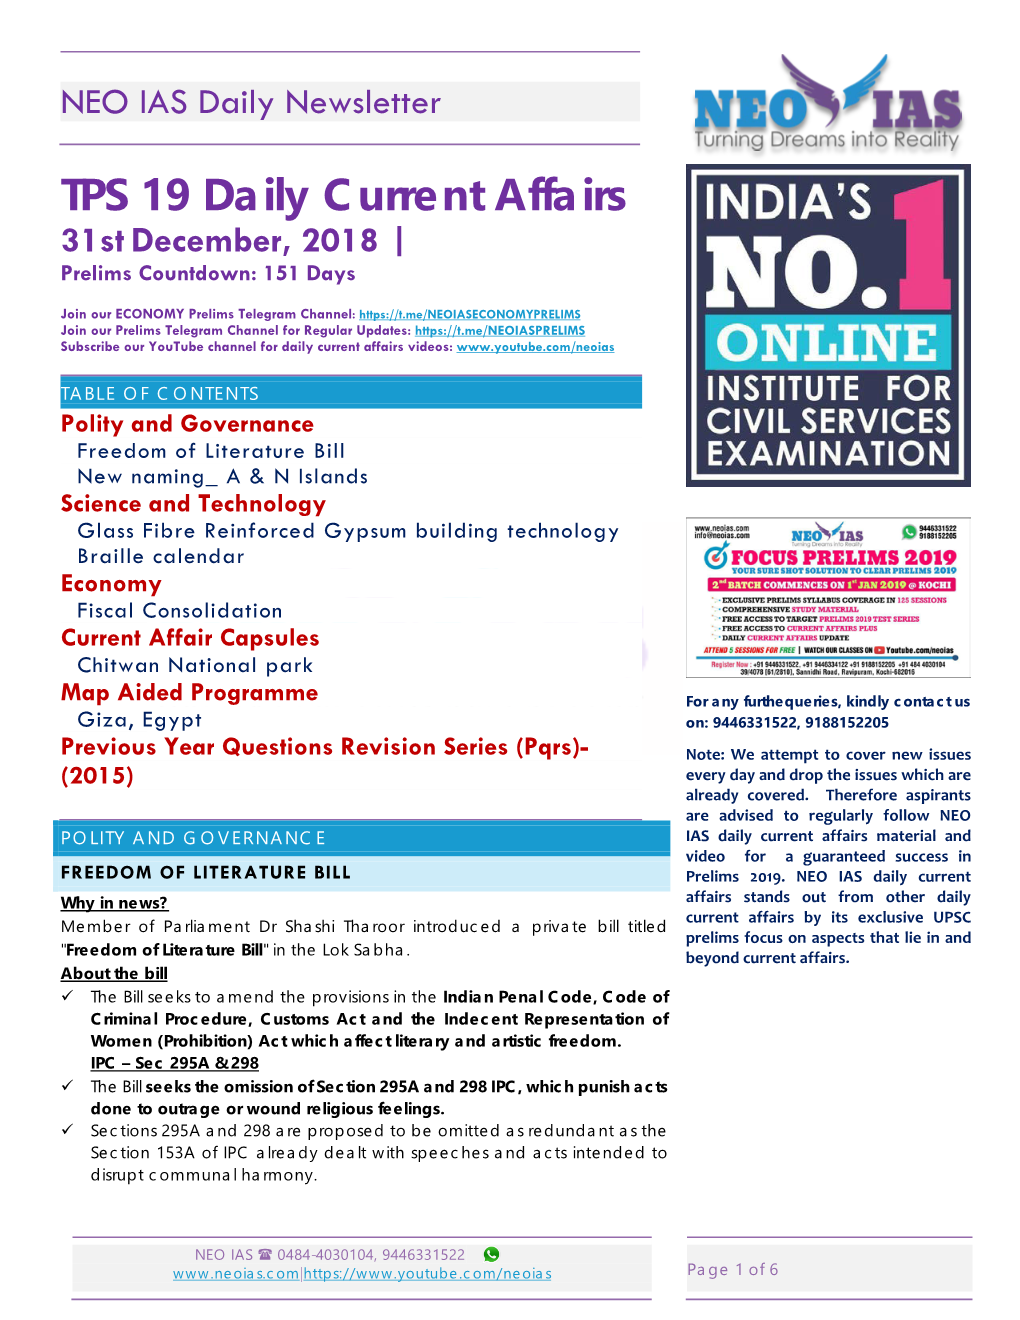 TPS 19 Daily Current Affairs